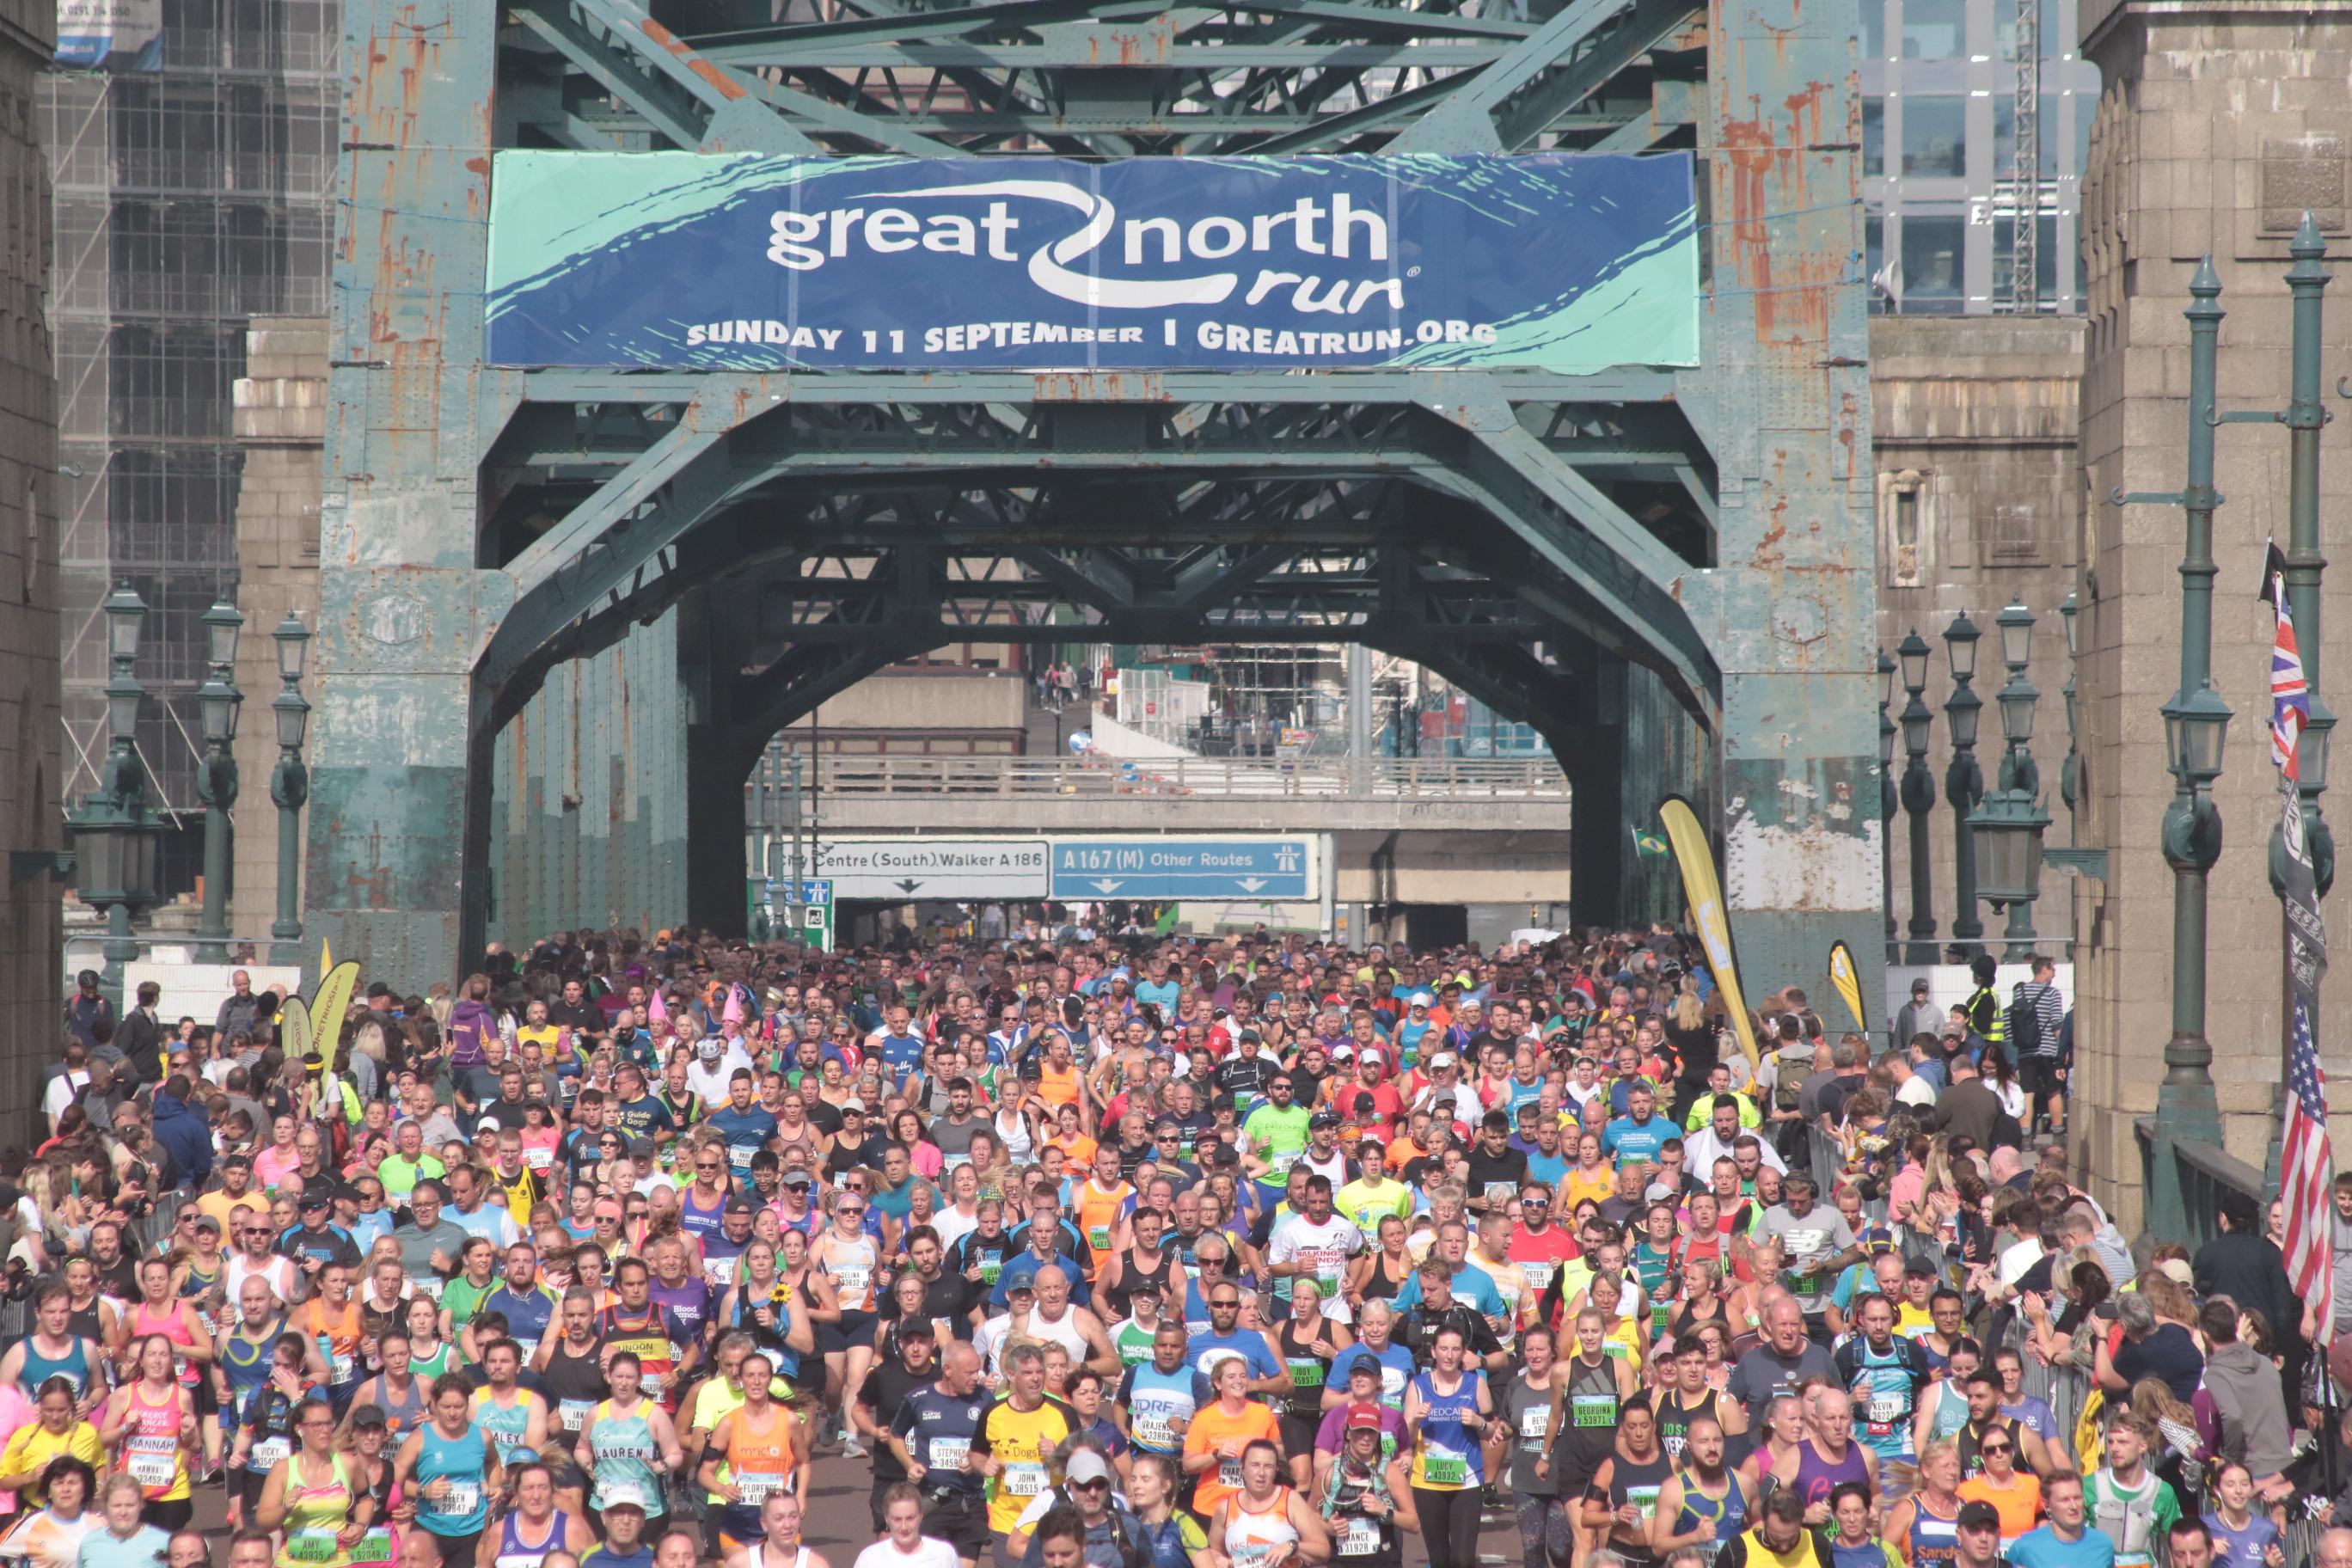 Photo of runners crossing the tyne bridge during the Great North Run. I am in the crowd wearing a red running shirt and a white cap.